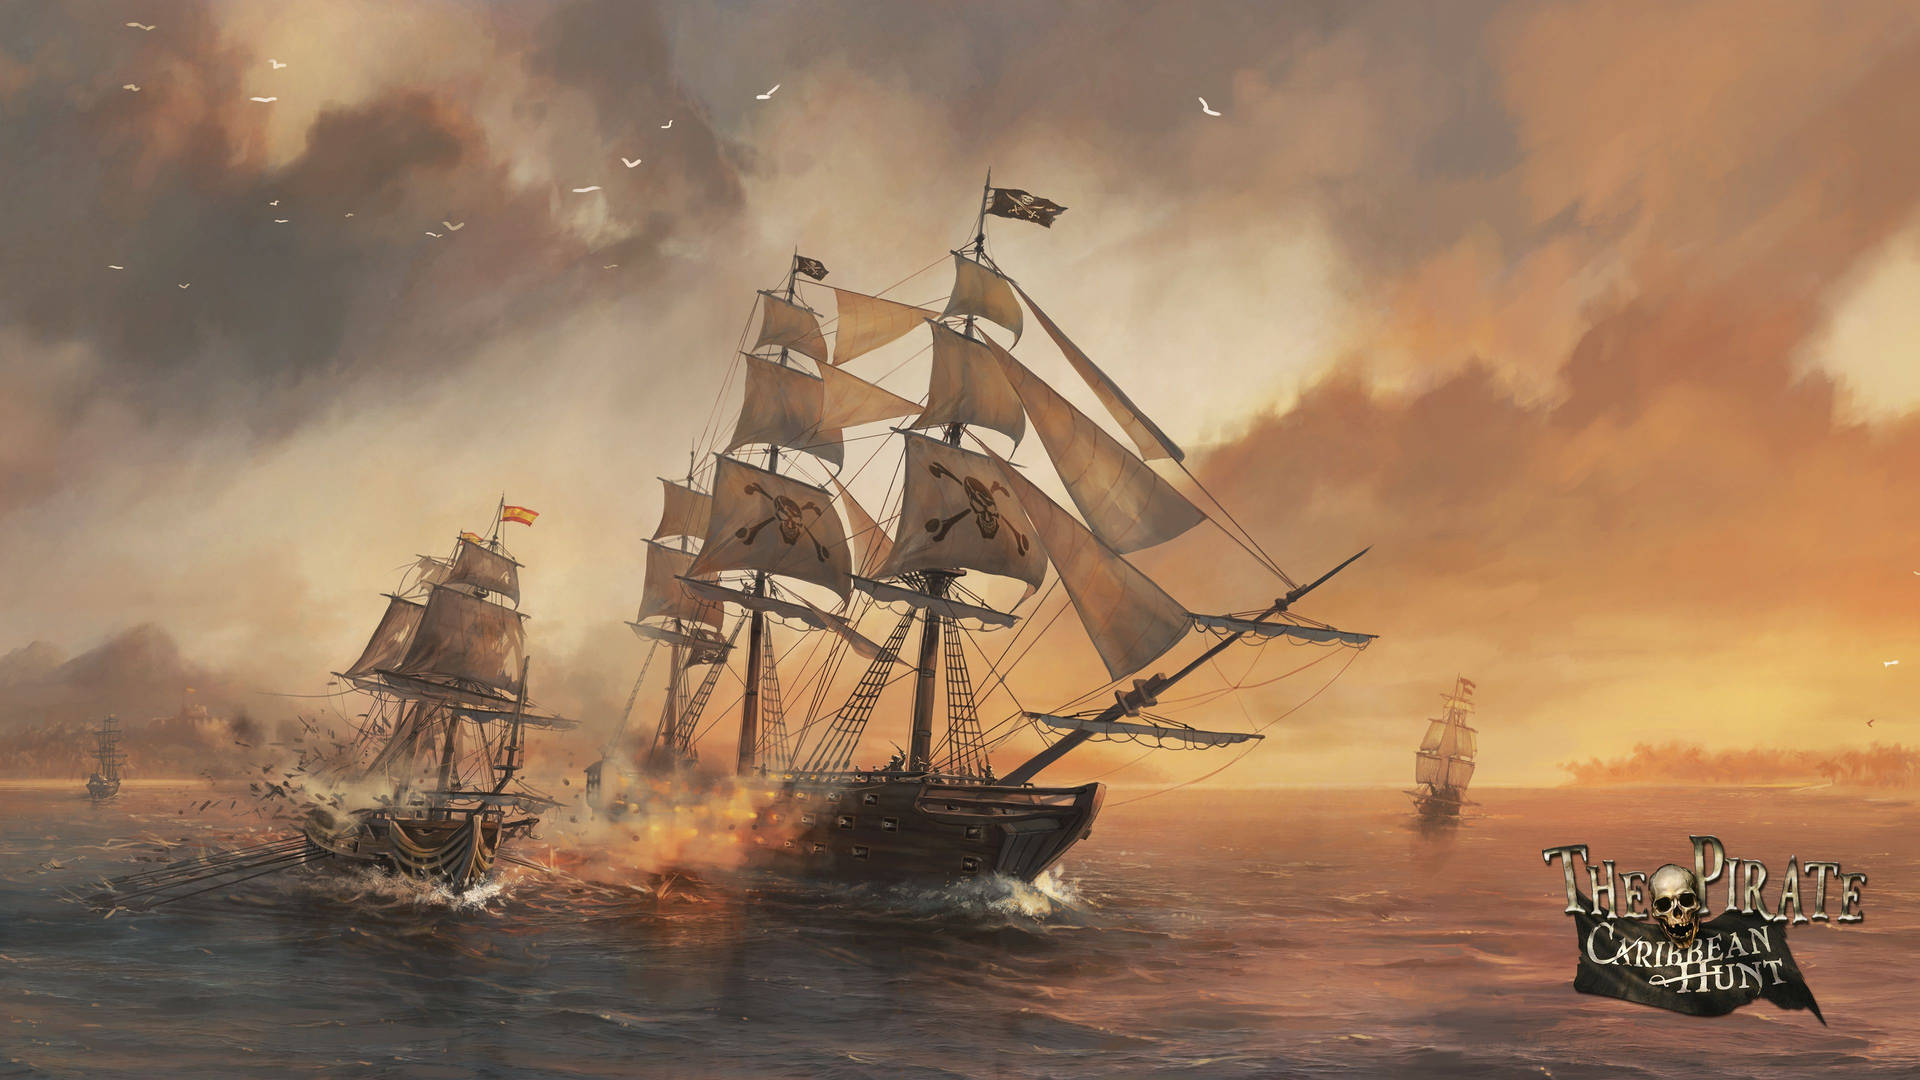 Ship under attack on the high-seas Wallpaper